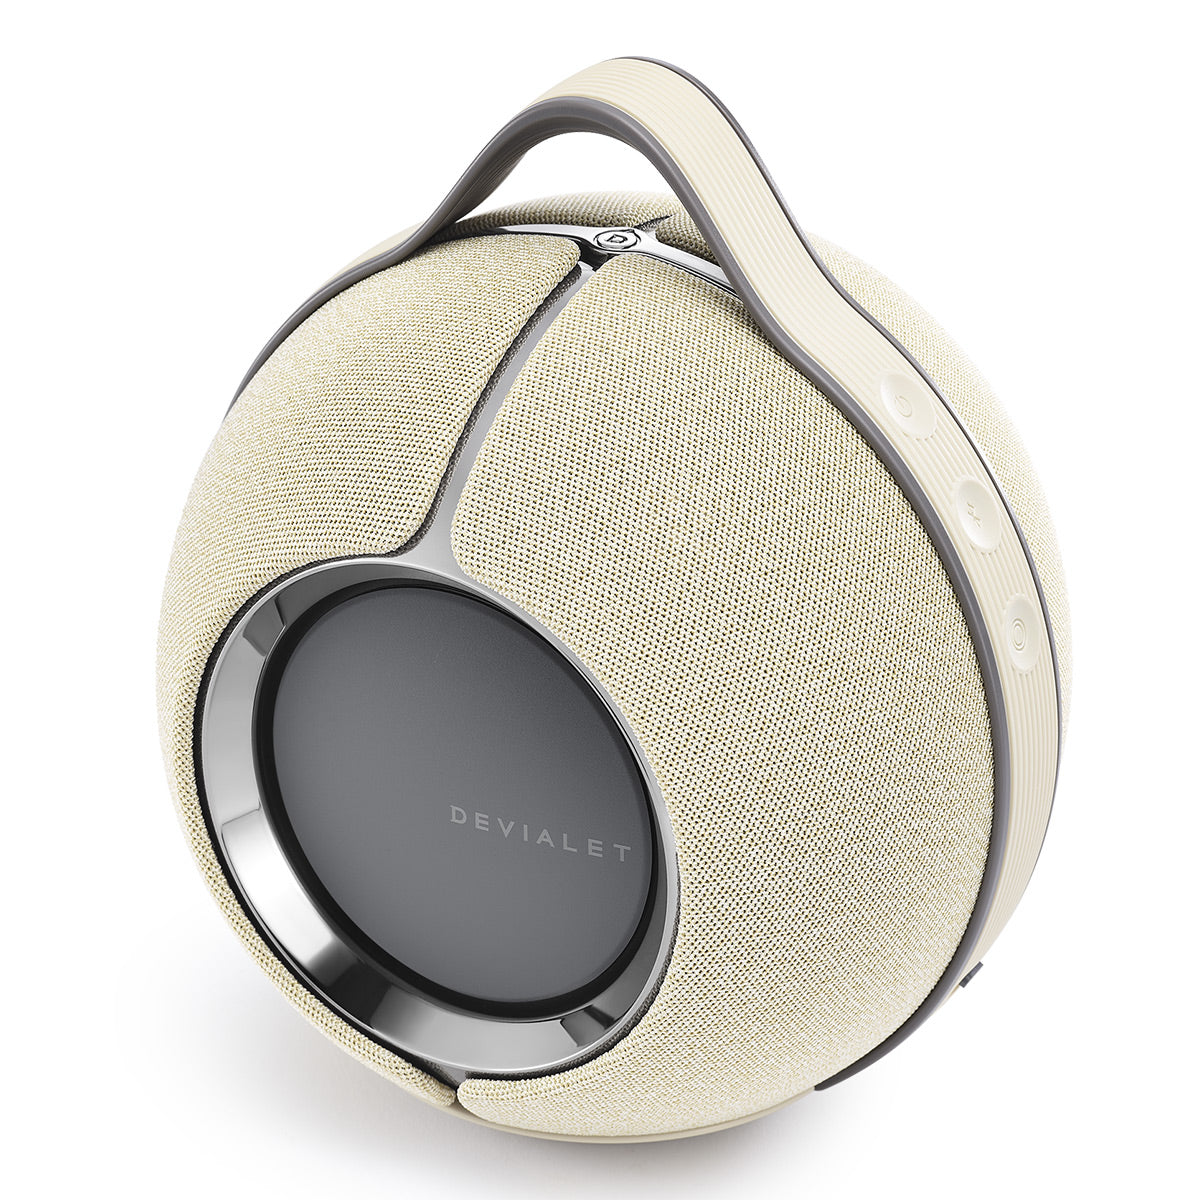 Devialet Mania Portable Bluetooth Smart Speaker (Sandstorm) with Charging Station and Cocoon Felt Carrying Case